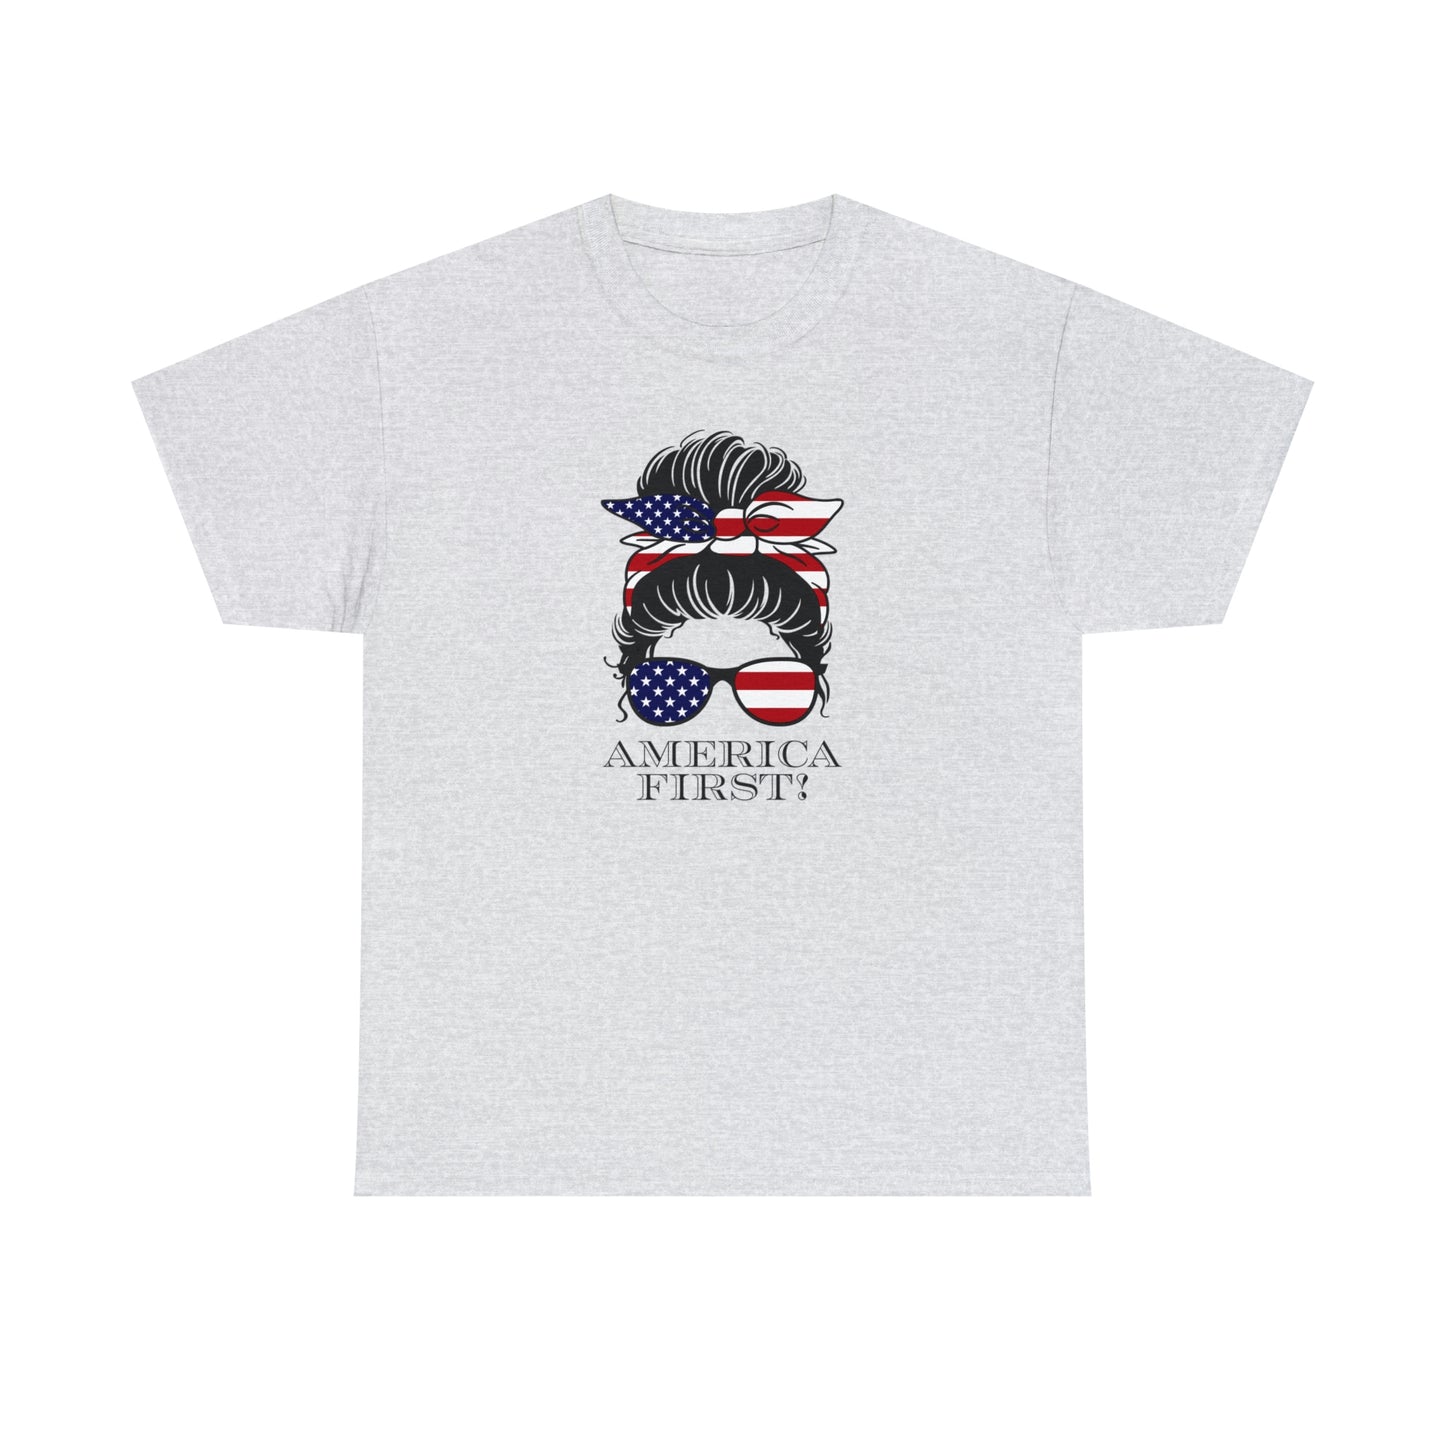 America First Patriotic T-Shirt For Female Patriot Tshirt Conservative Shirts Patriotic T Shirt Conservative Gifts For Patriotic Women